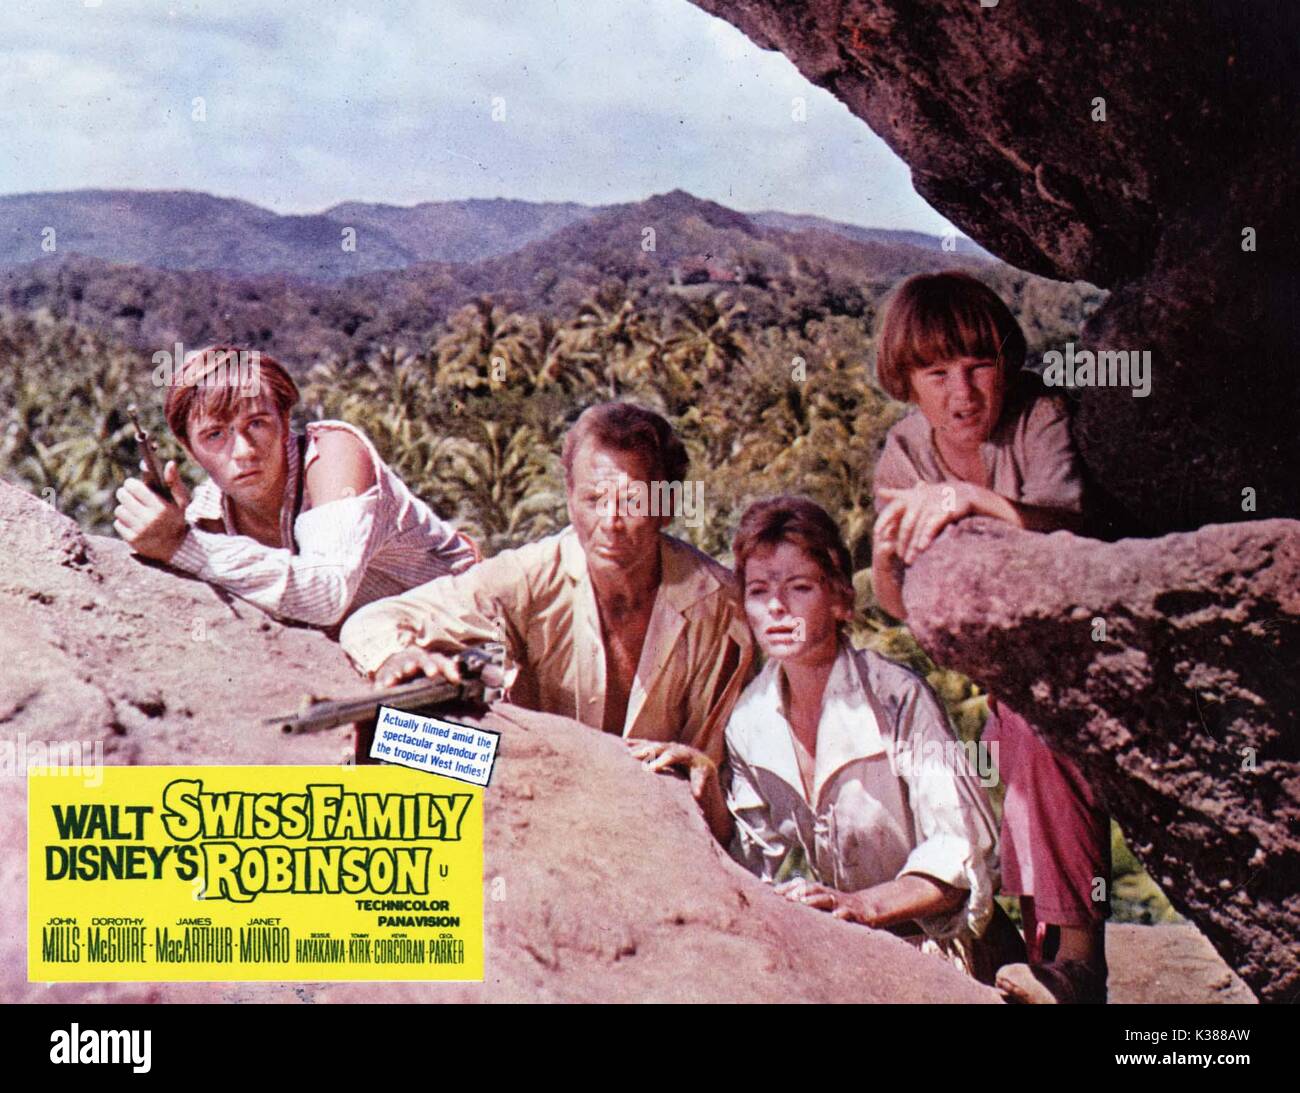 SWISS FAMILY ROBINSON TOMMY KIRK, JOHN MILLS, DOROTHY McGUIRE AND KEVIN  CORCORAN A WALT DISNEY FILM Date: 1960 Stock Photo - Alamy